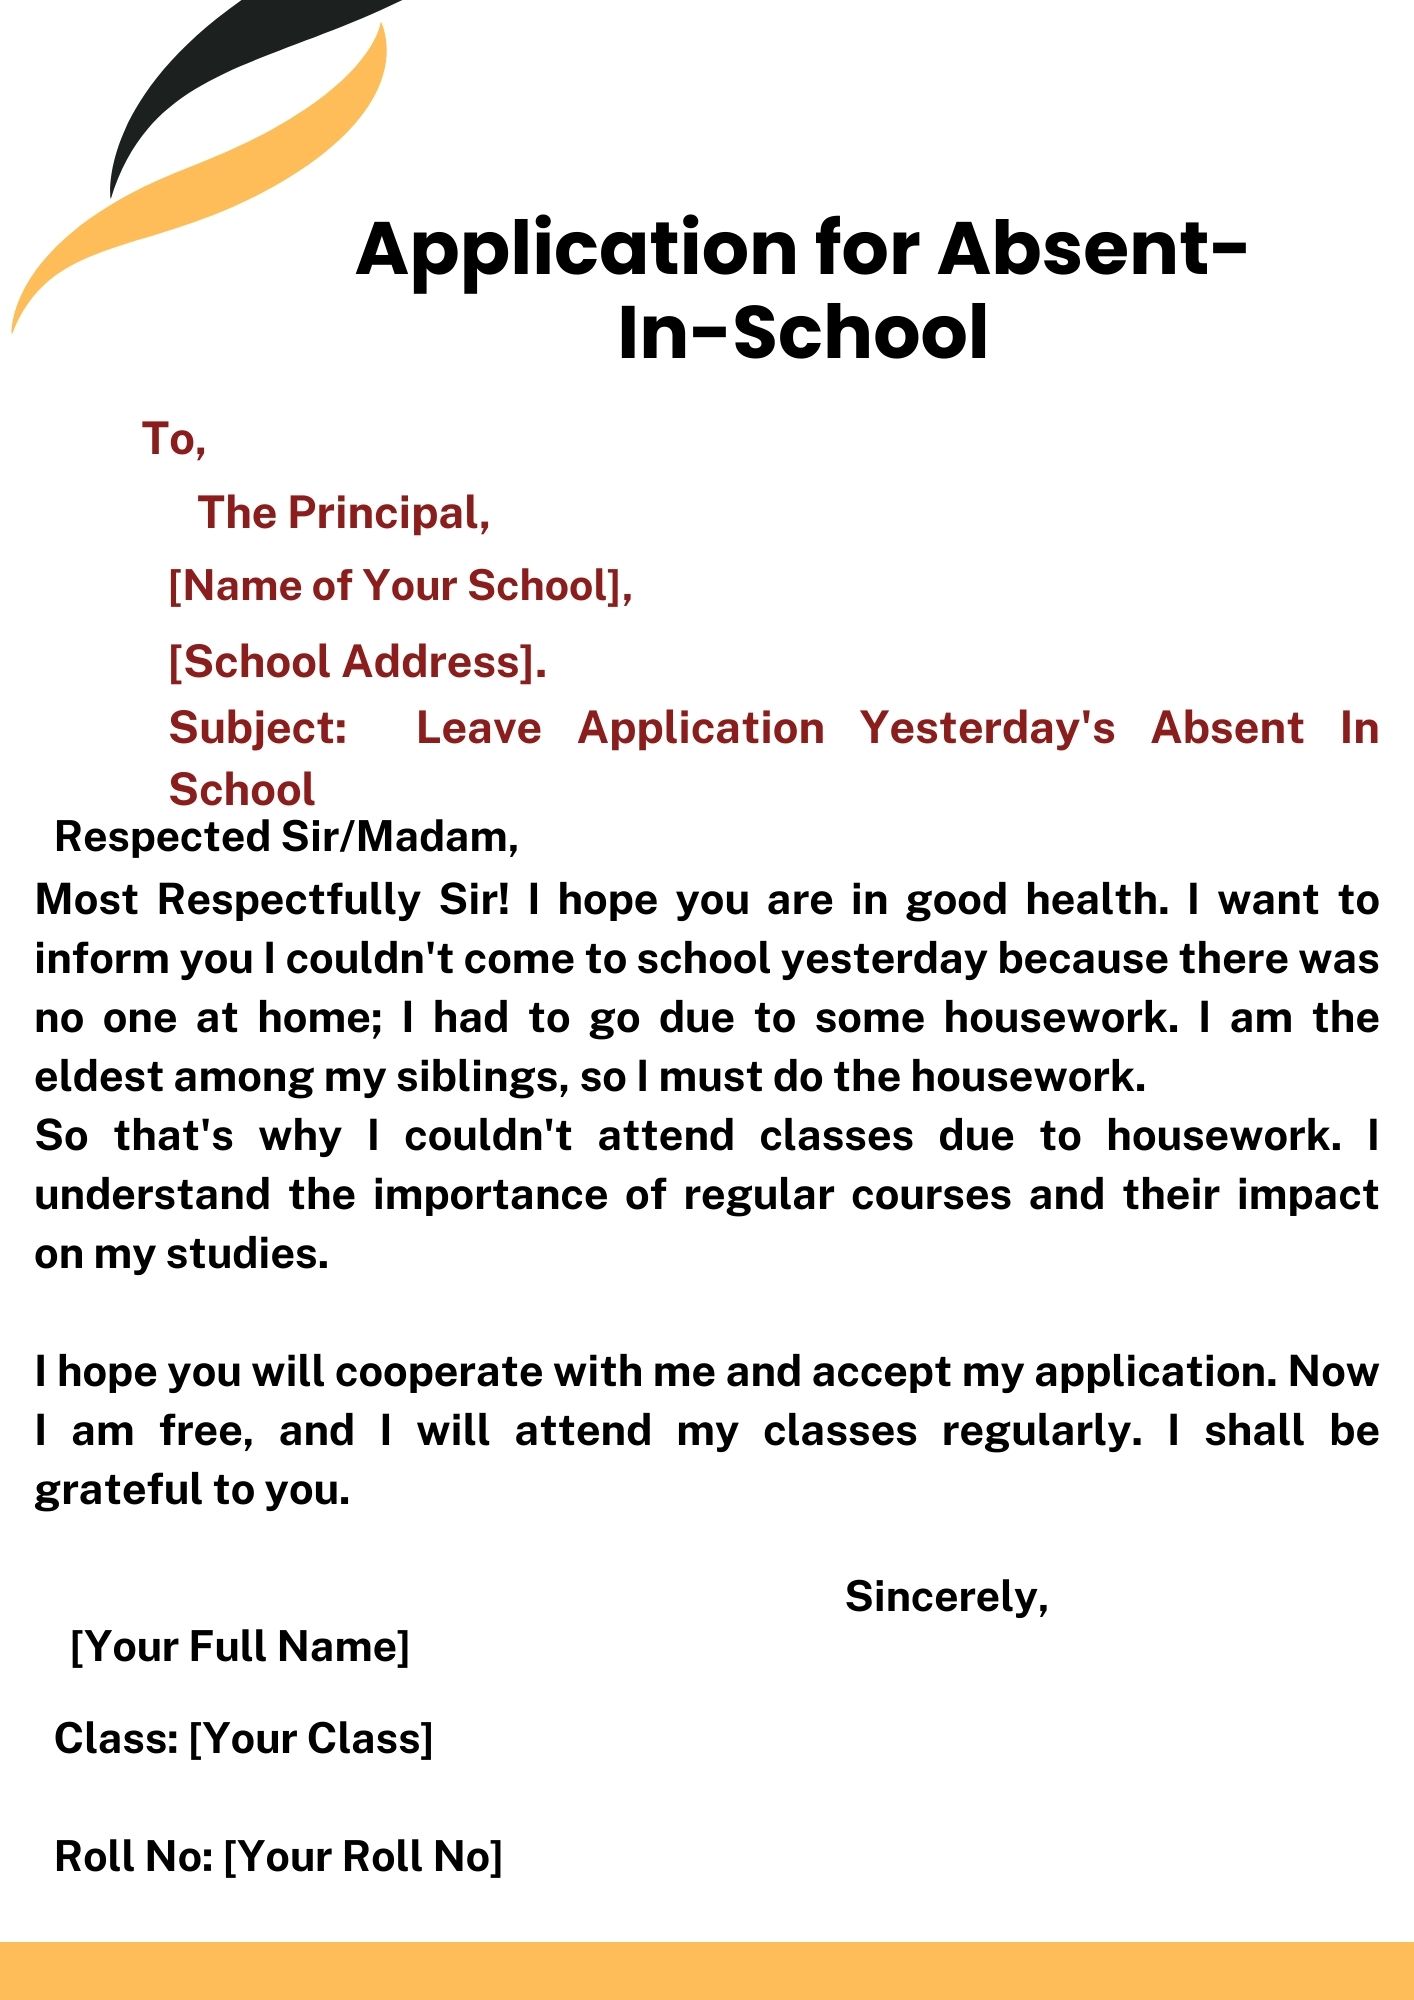 Leave Application Yesterday's Absent In School